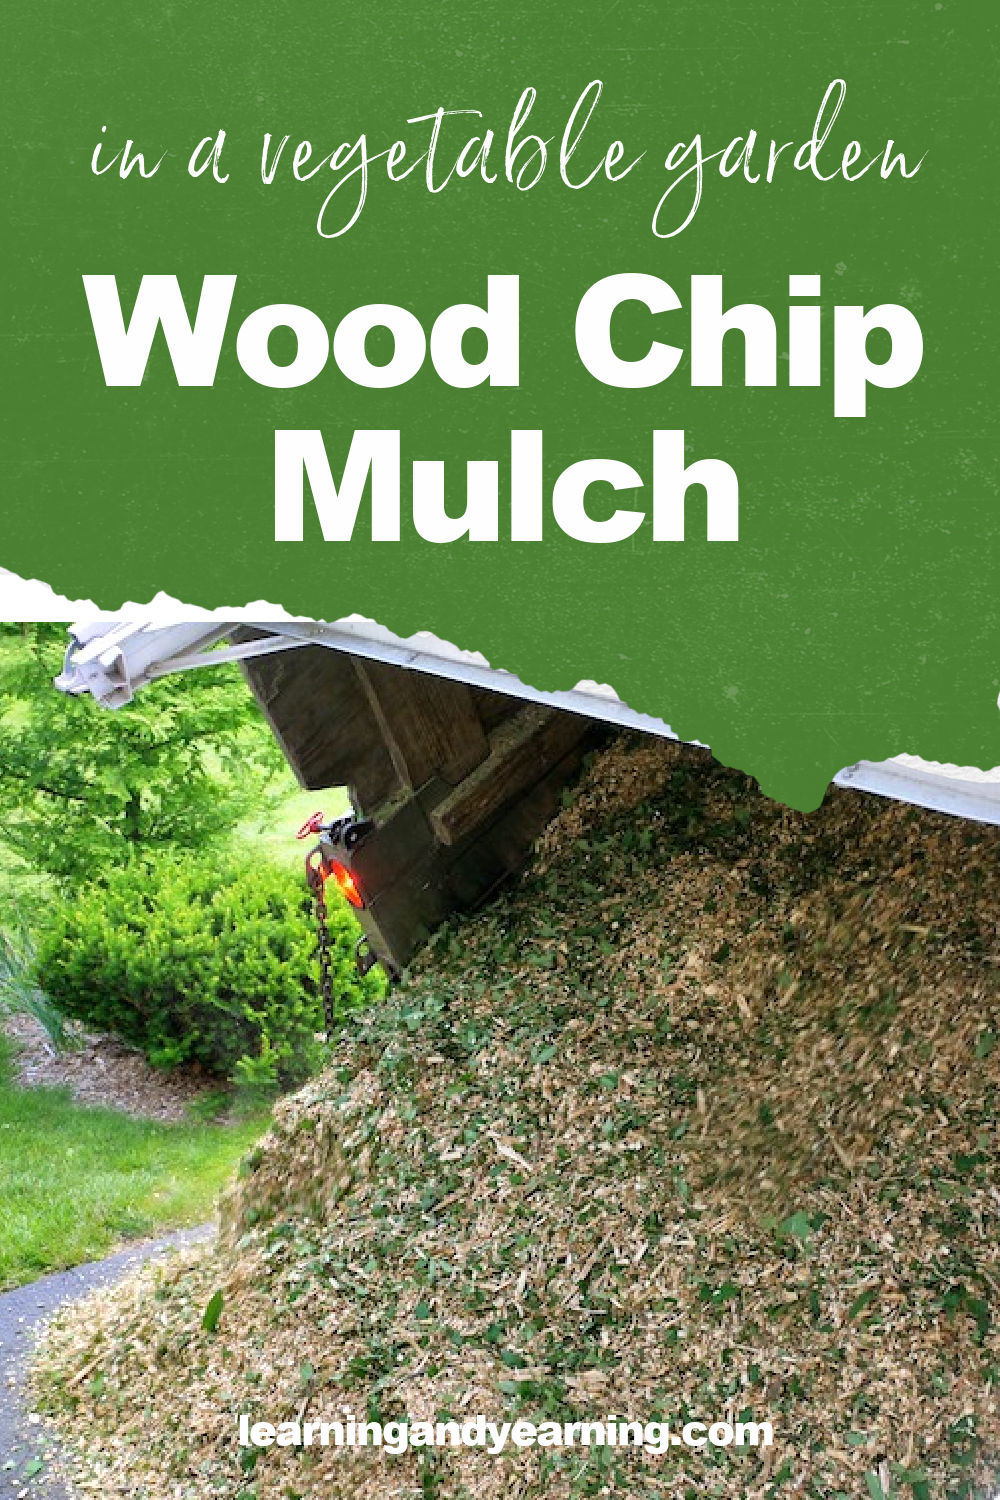 Top 10 Reasons to Choose Wood Chips Over Other Types of Mulch - Leaf & Limb